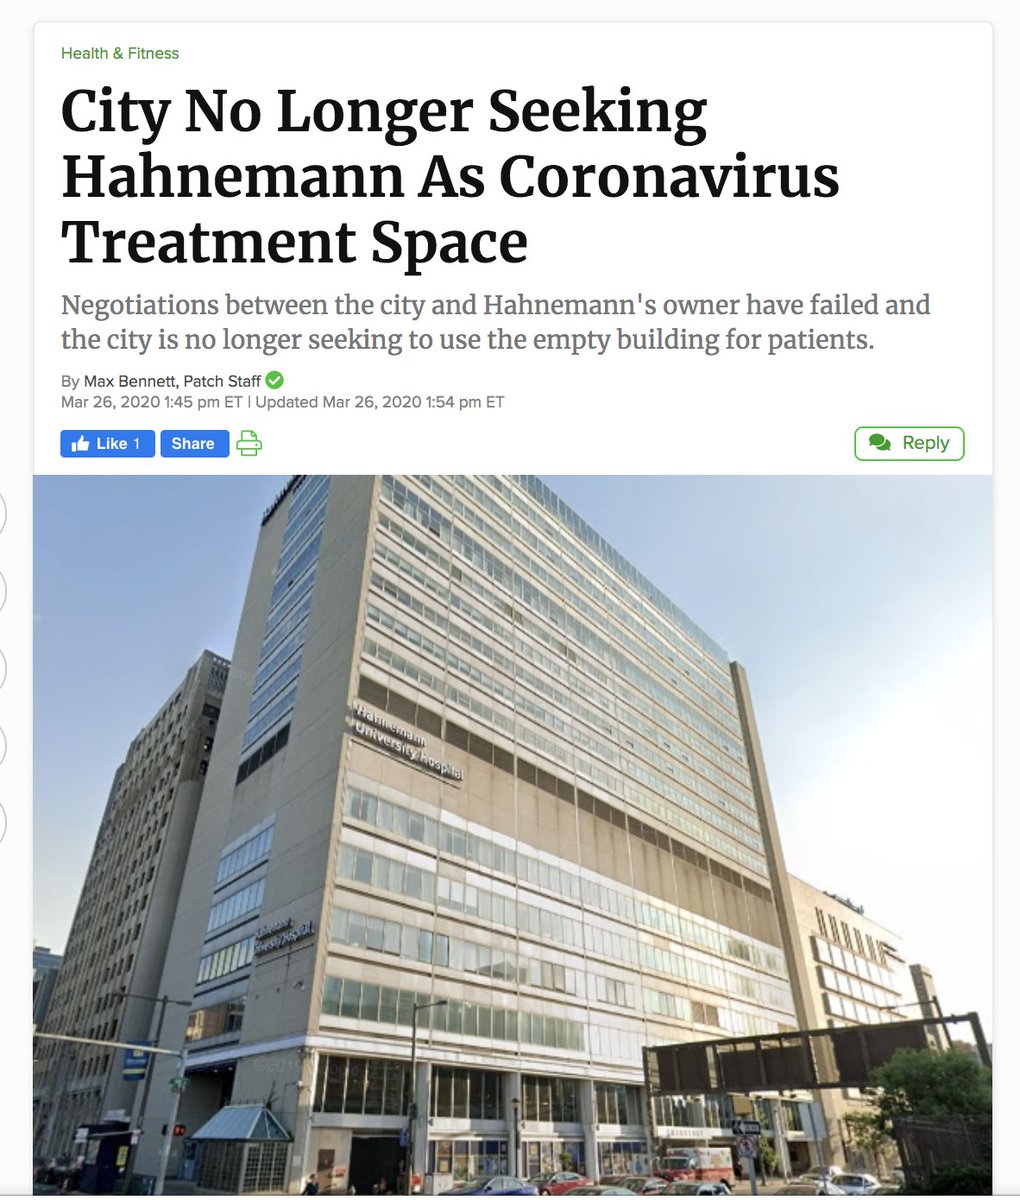 Hospitals, even gutted ones without equipment, are WAY BETTER CHOICES for overflow emergency hospitals - the physical structure of the buildings is better than hotels and stadiums. Our emergency rooms are about to be overrun by COVID patients. Hahnemann will remain closed.